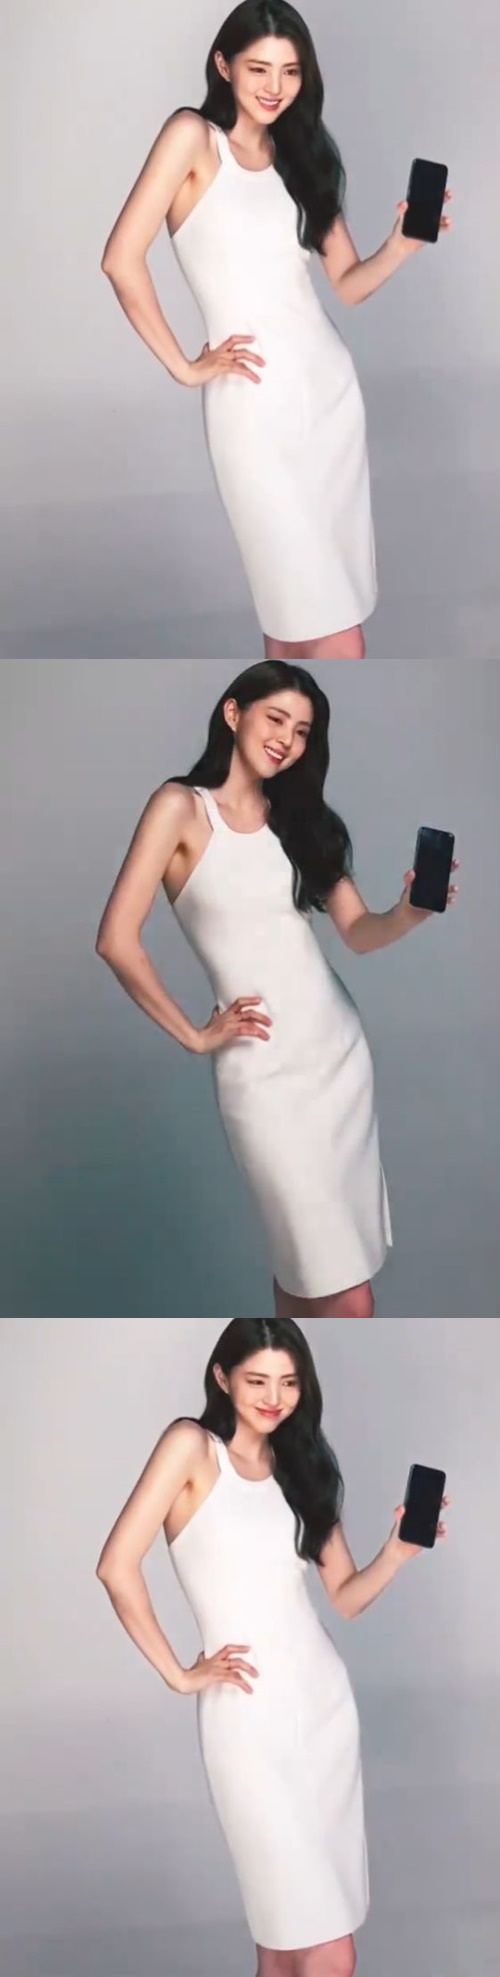 Actor Han So Hee shows off her beautiful figureHan So Hee posted a short video on Instagram on the 31st that appeared to be shooting the advertisement.In the video, Han So Hee posed with a white holtern neck dress and a cell phone.Especially, the doll beauty that does not need quality-adjusted life year gives the admiration of the viewers.Meanwhile, Han So Hee is filming a new drama, I Know You, which will be broadcast first in June.